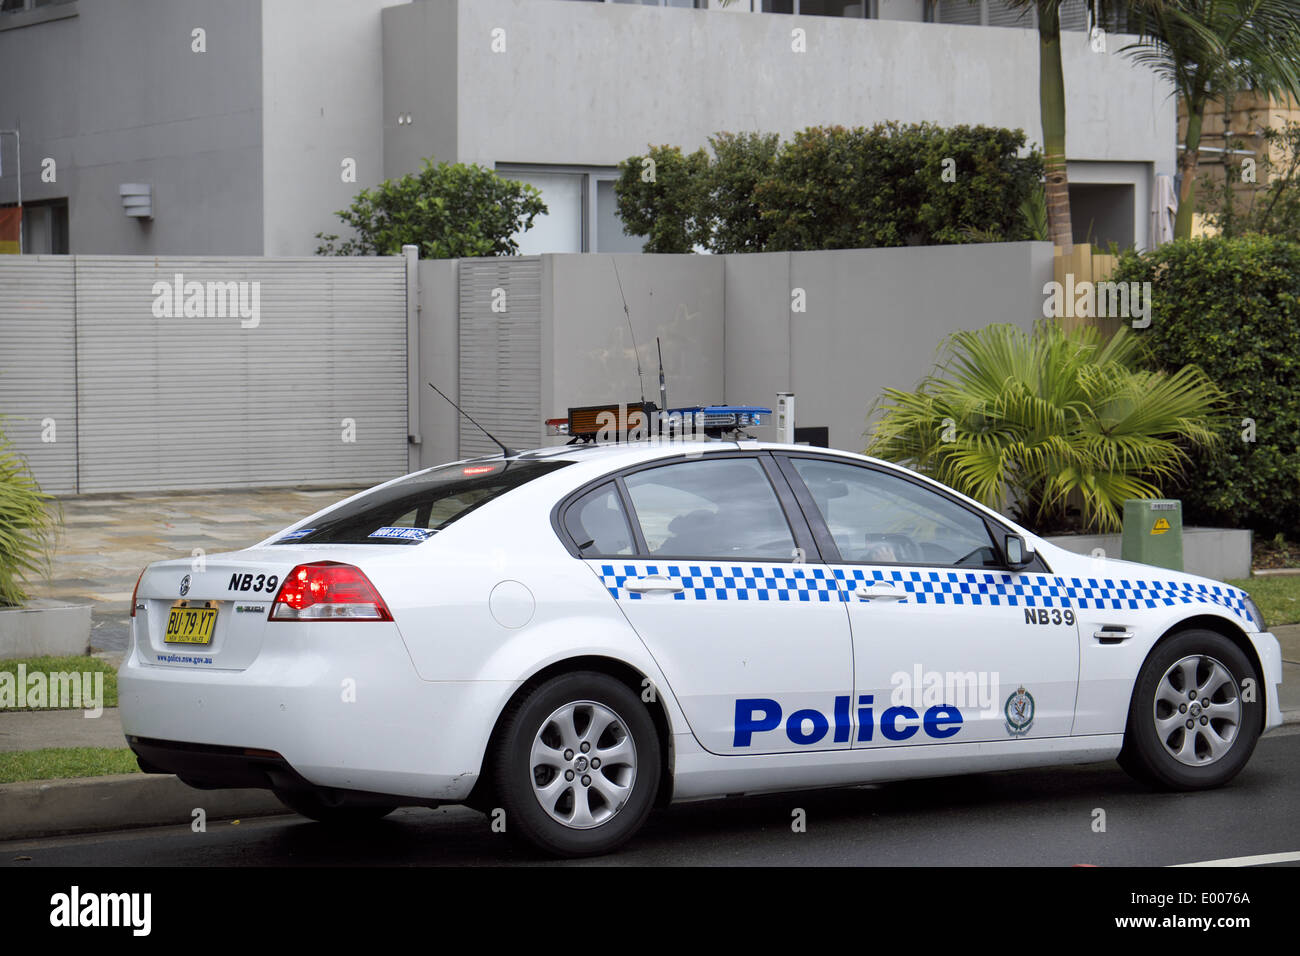 Holden Commodore, New south wales police car in Palm beach,Sydney,Australia Stock Photo